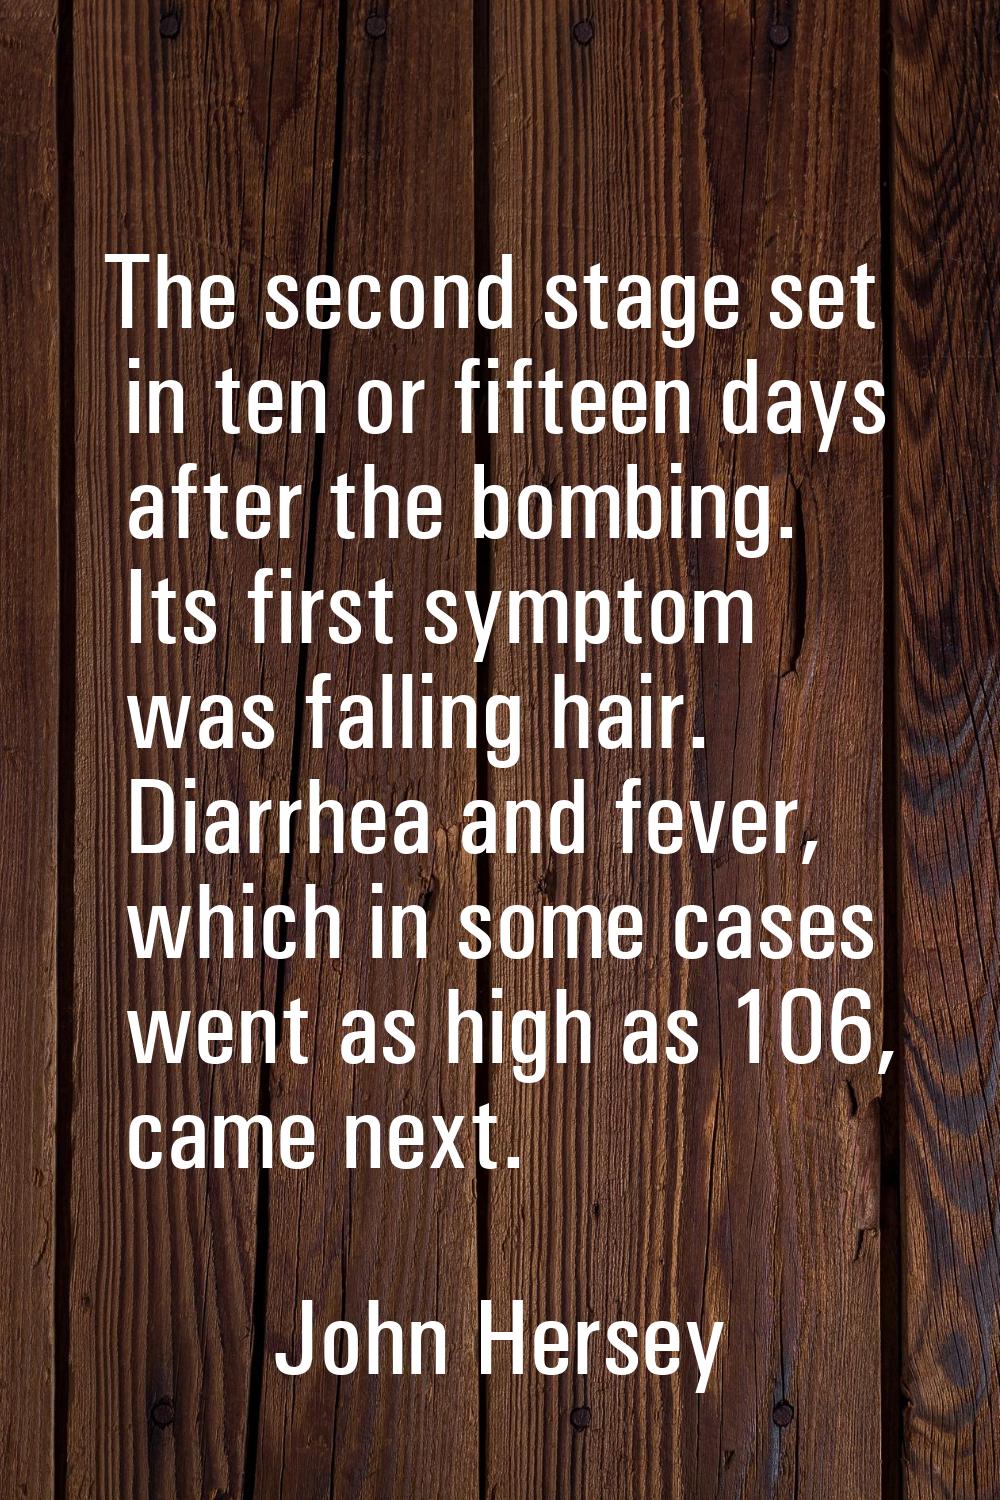 The second stage set in ten or fifteen days after the bombing. Its first symptom was falling hair. 